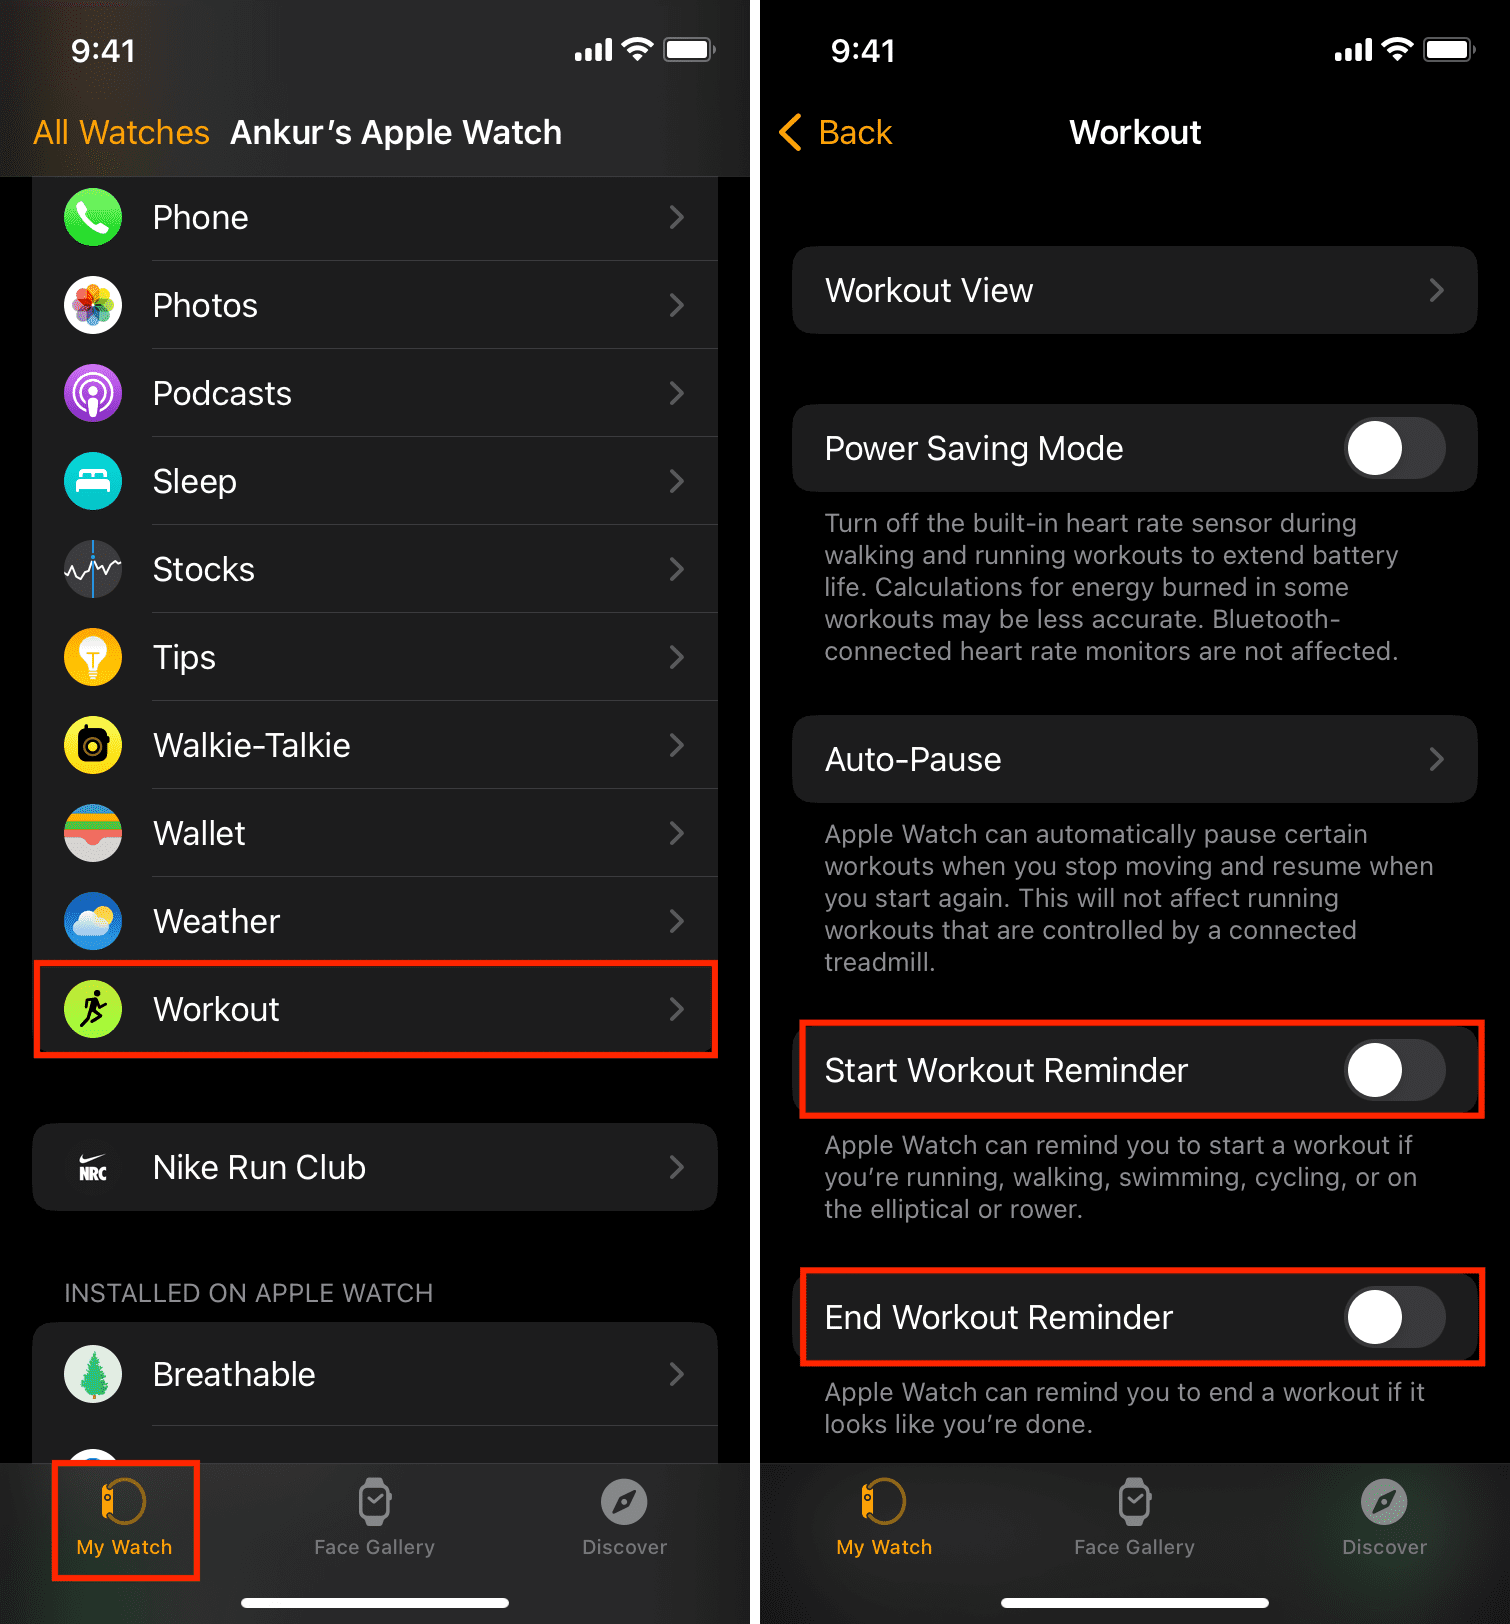 Start and end Workout Reminder settings in iOS Watch app